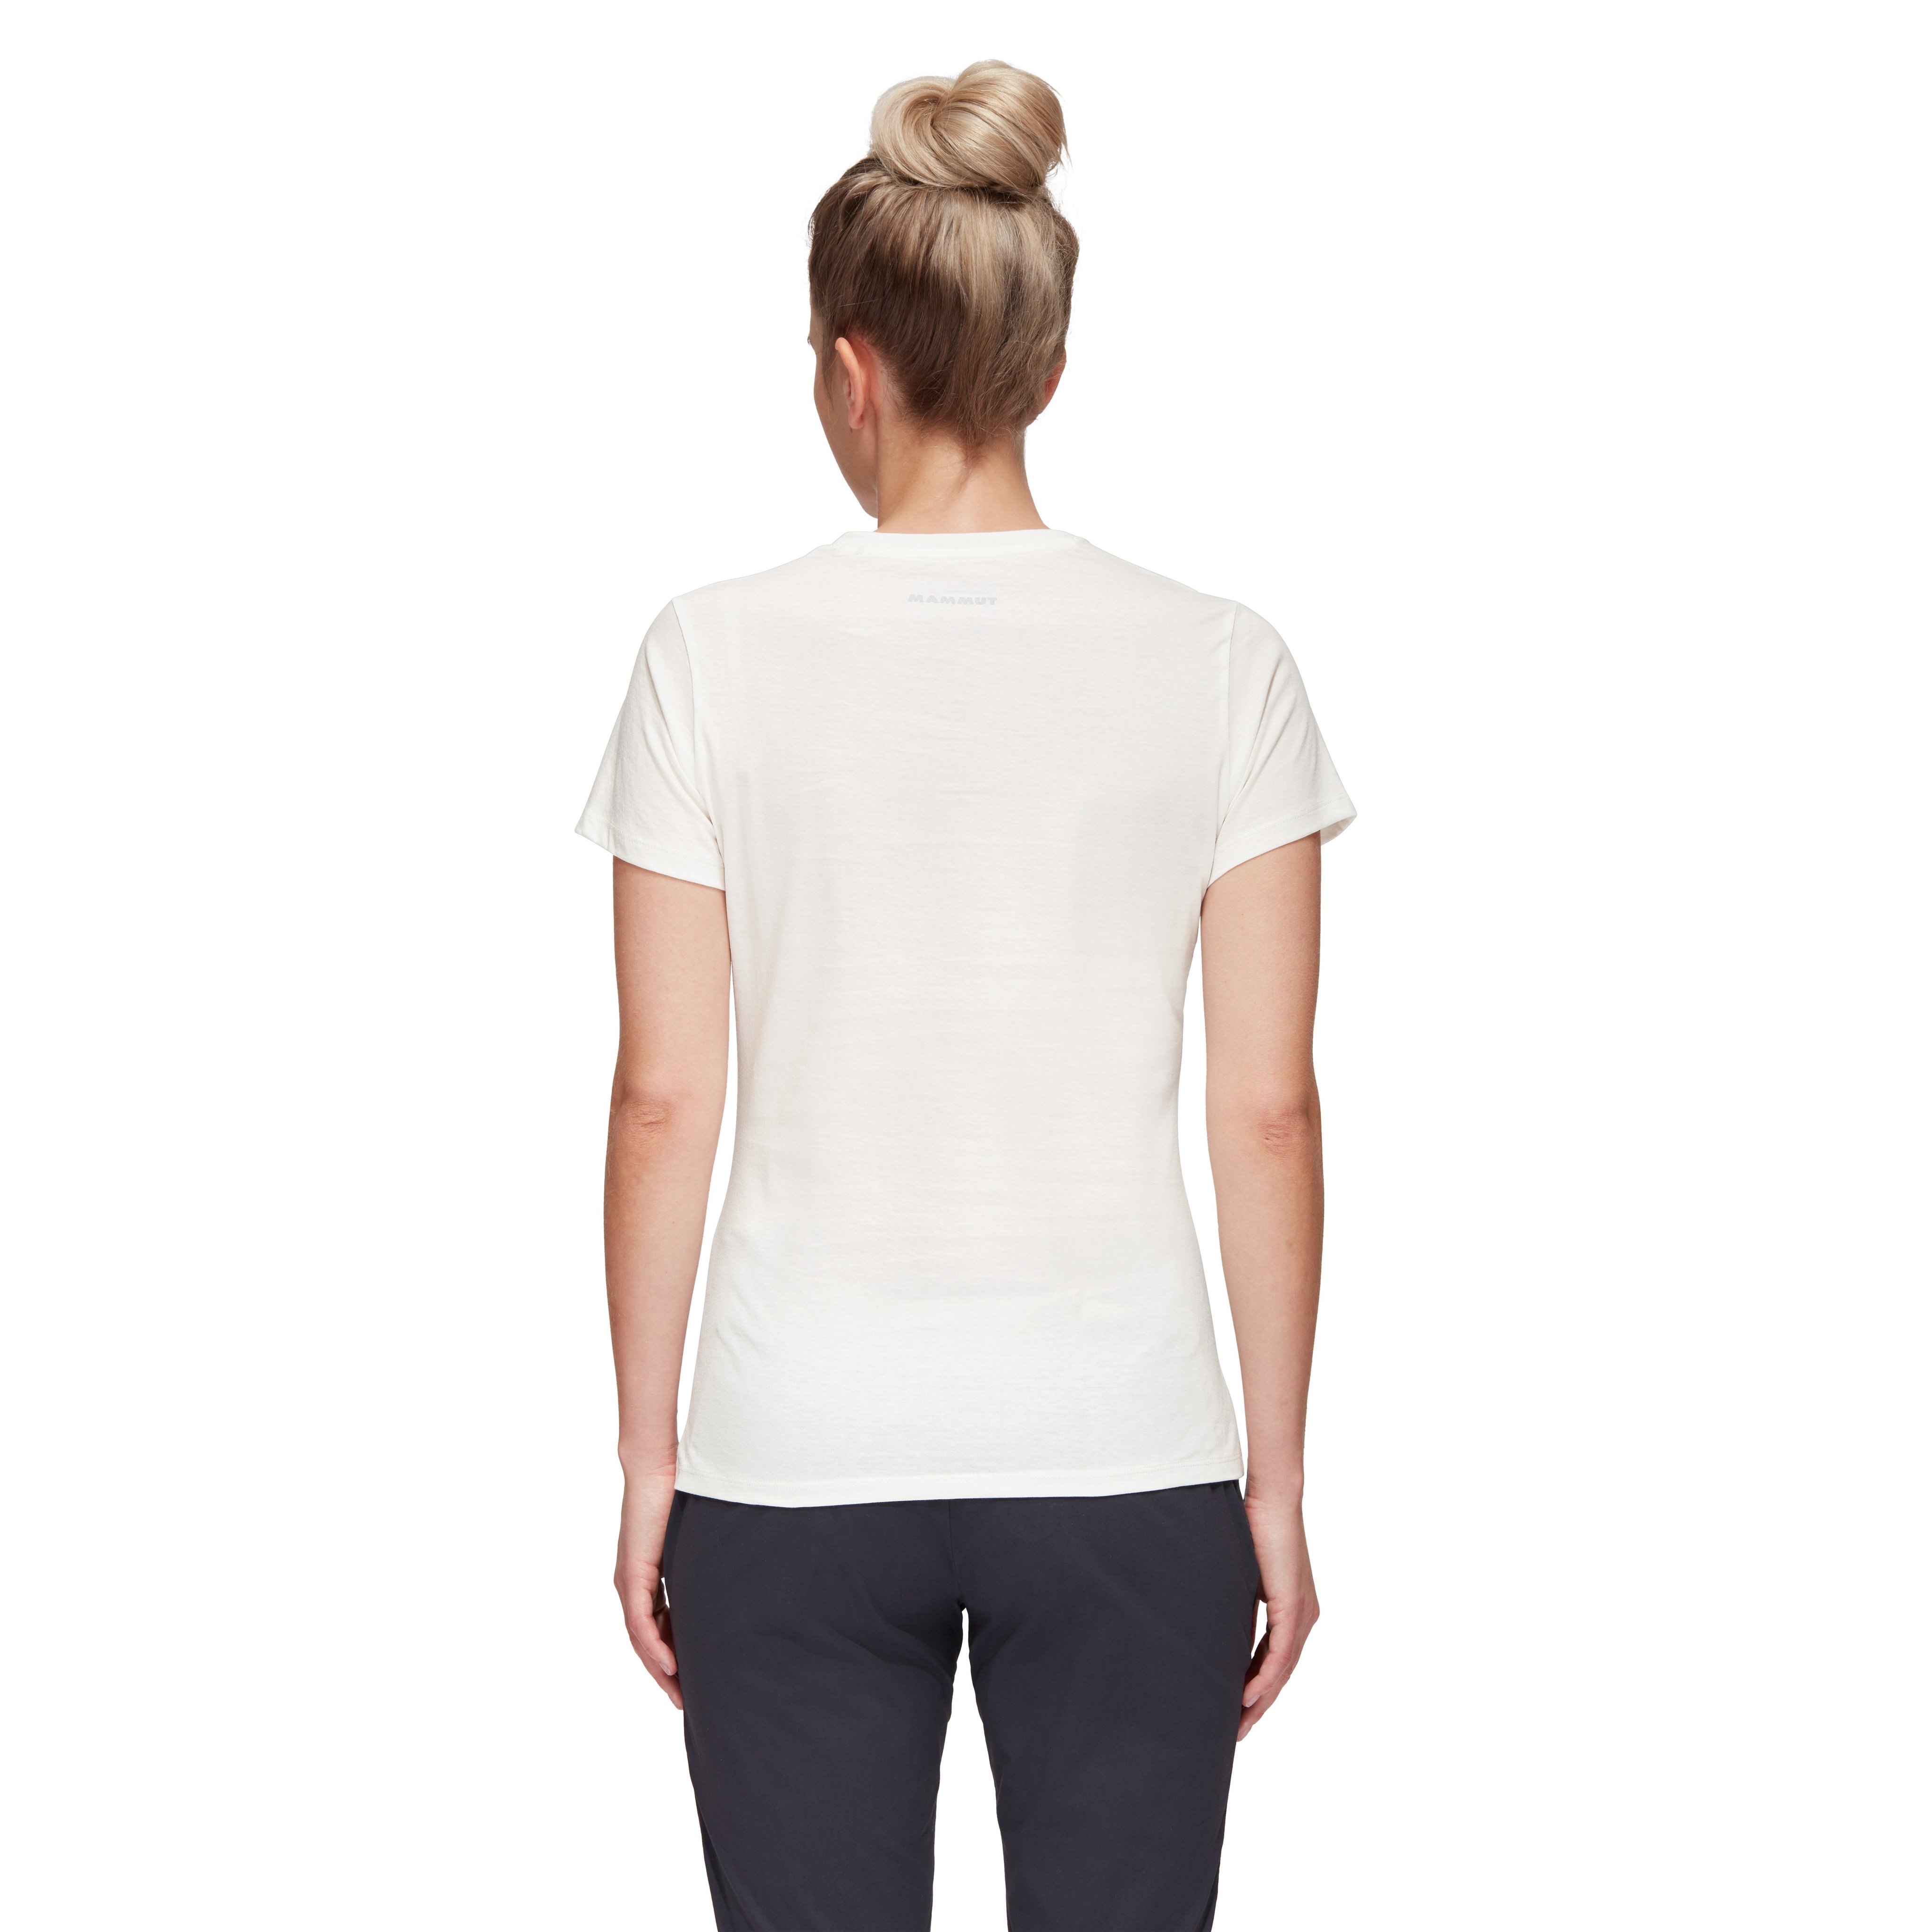 Nations T-Shirt Women product image